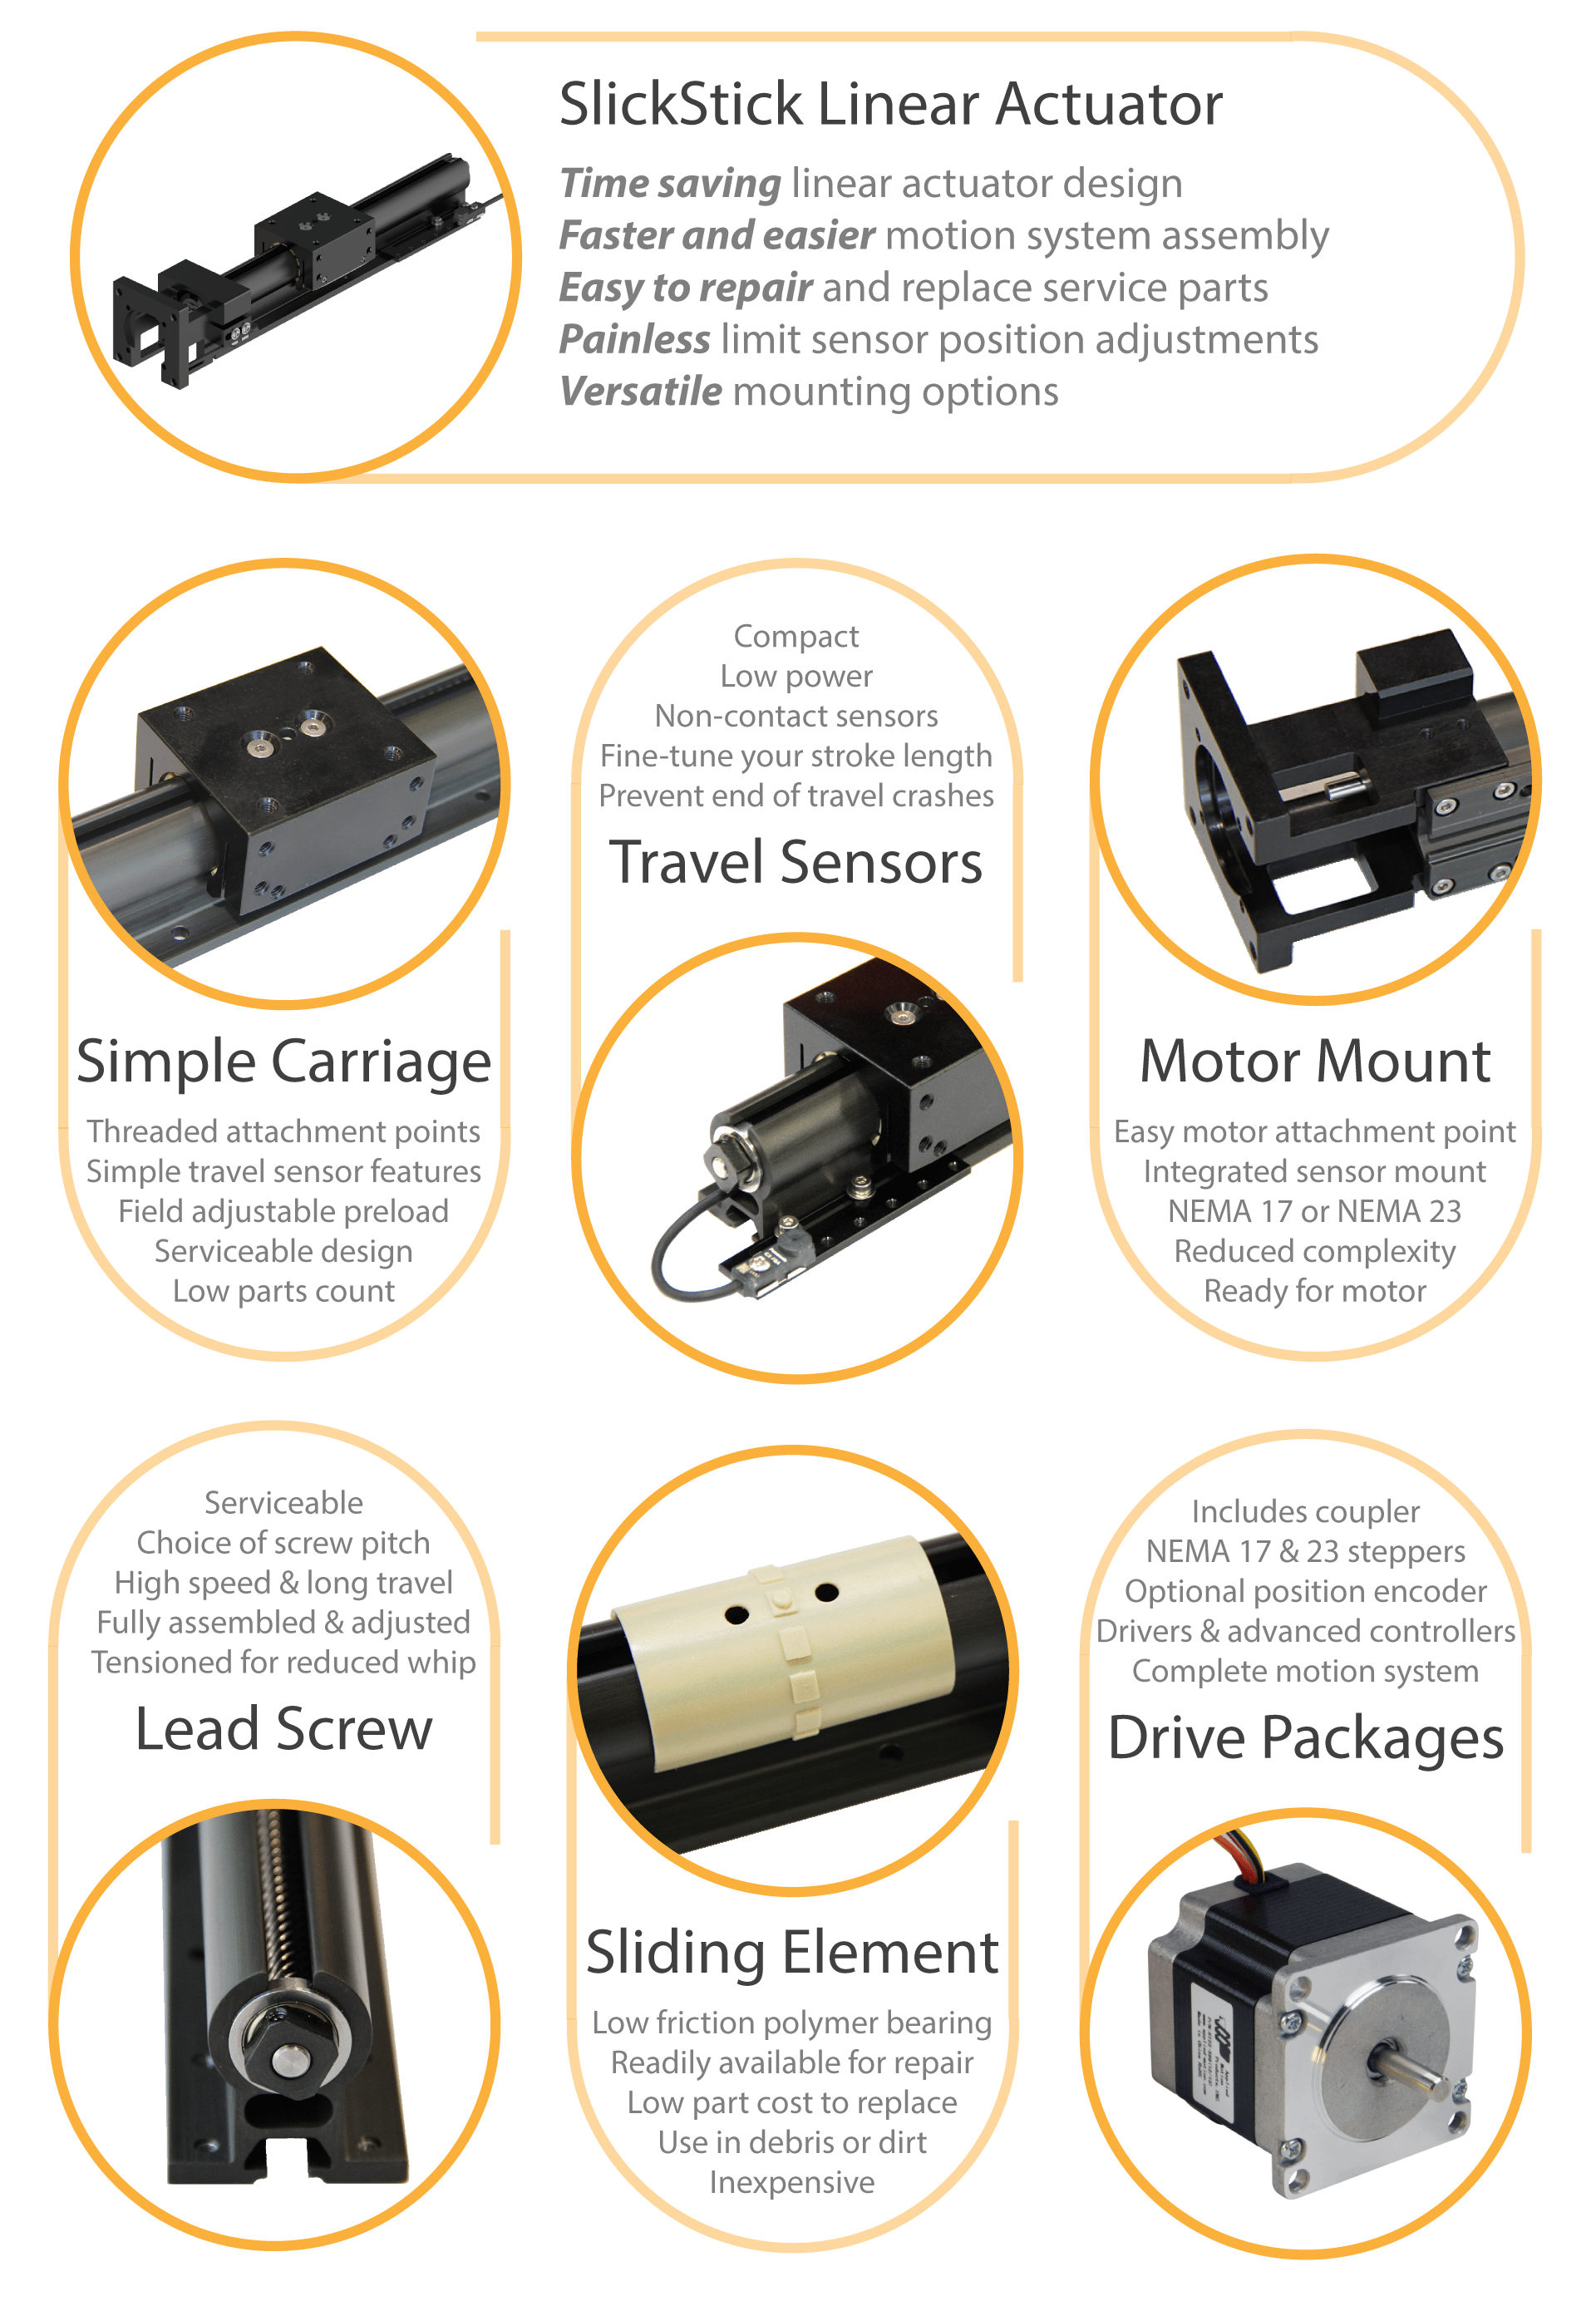 SlickStick Overview Graphic showing the features and advantages of the parts of the linear actuator.